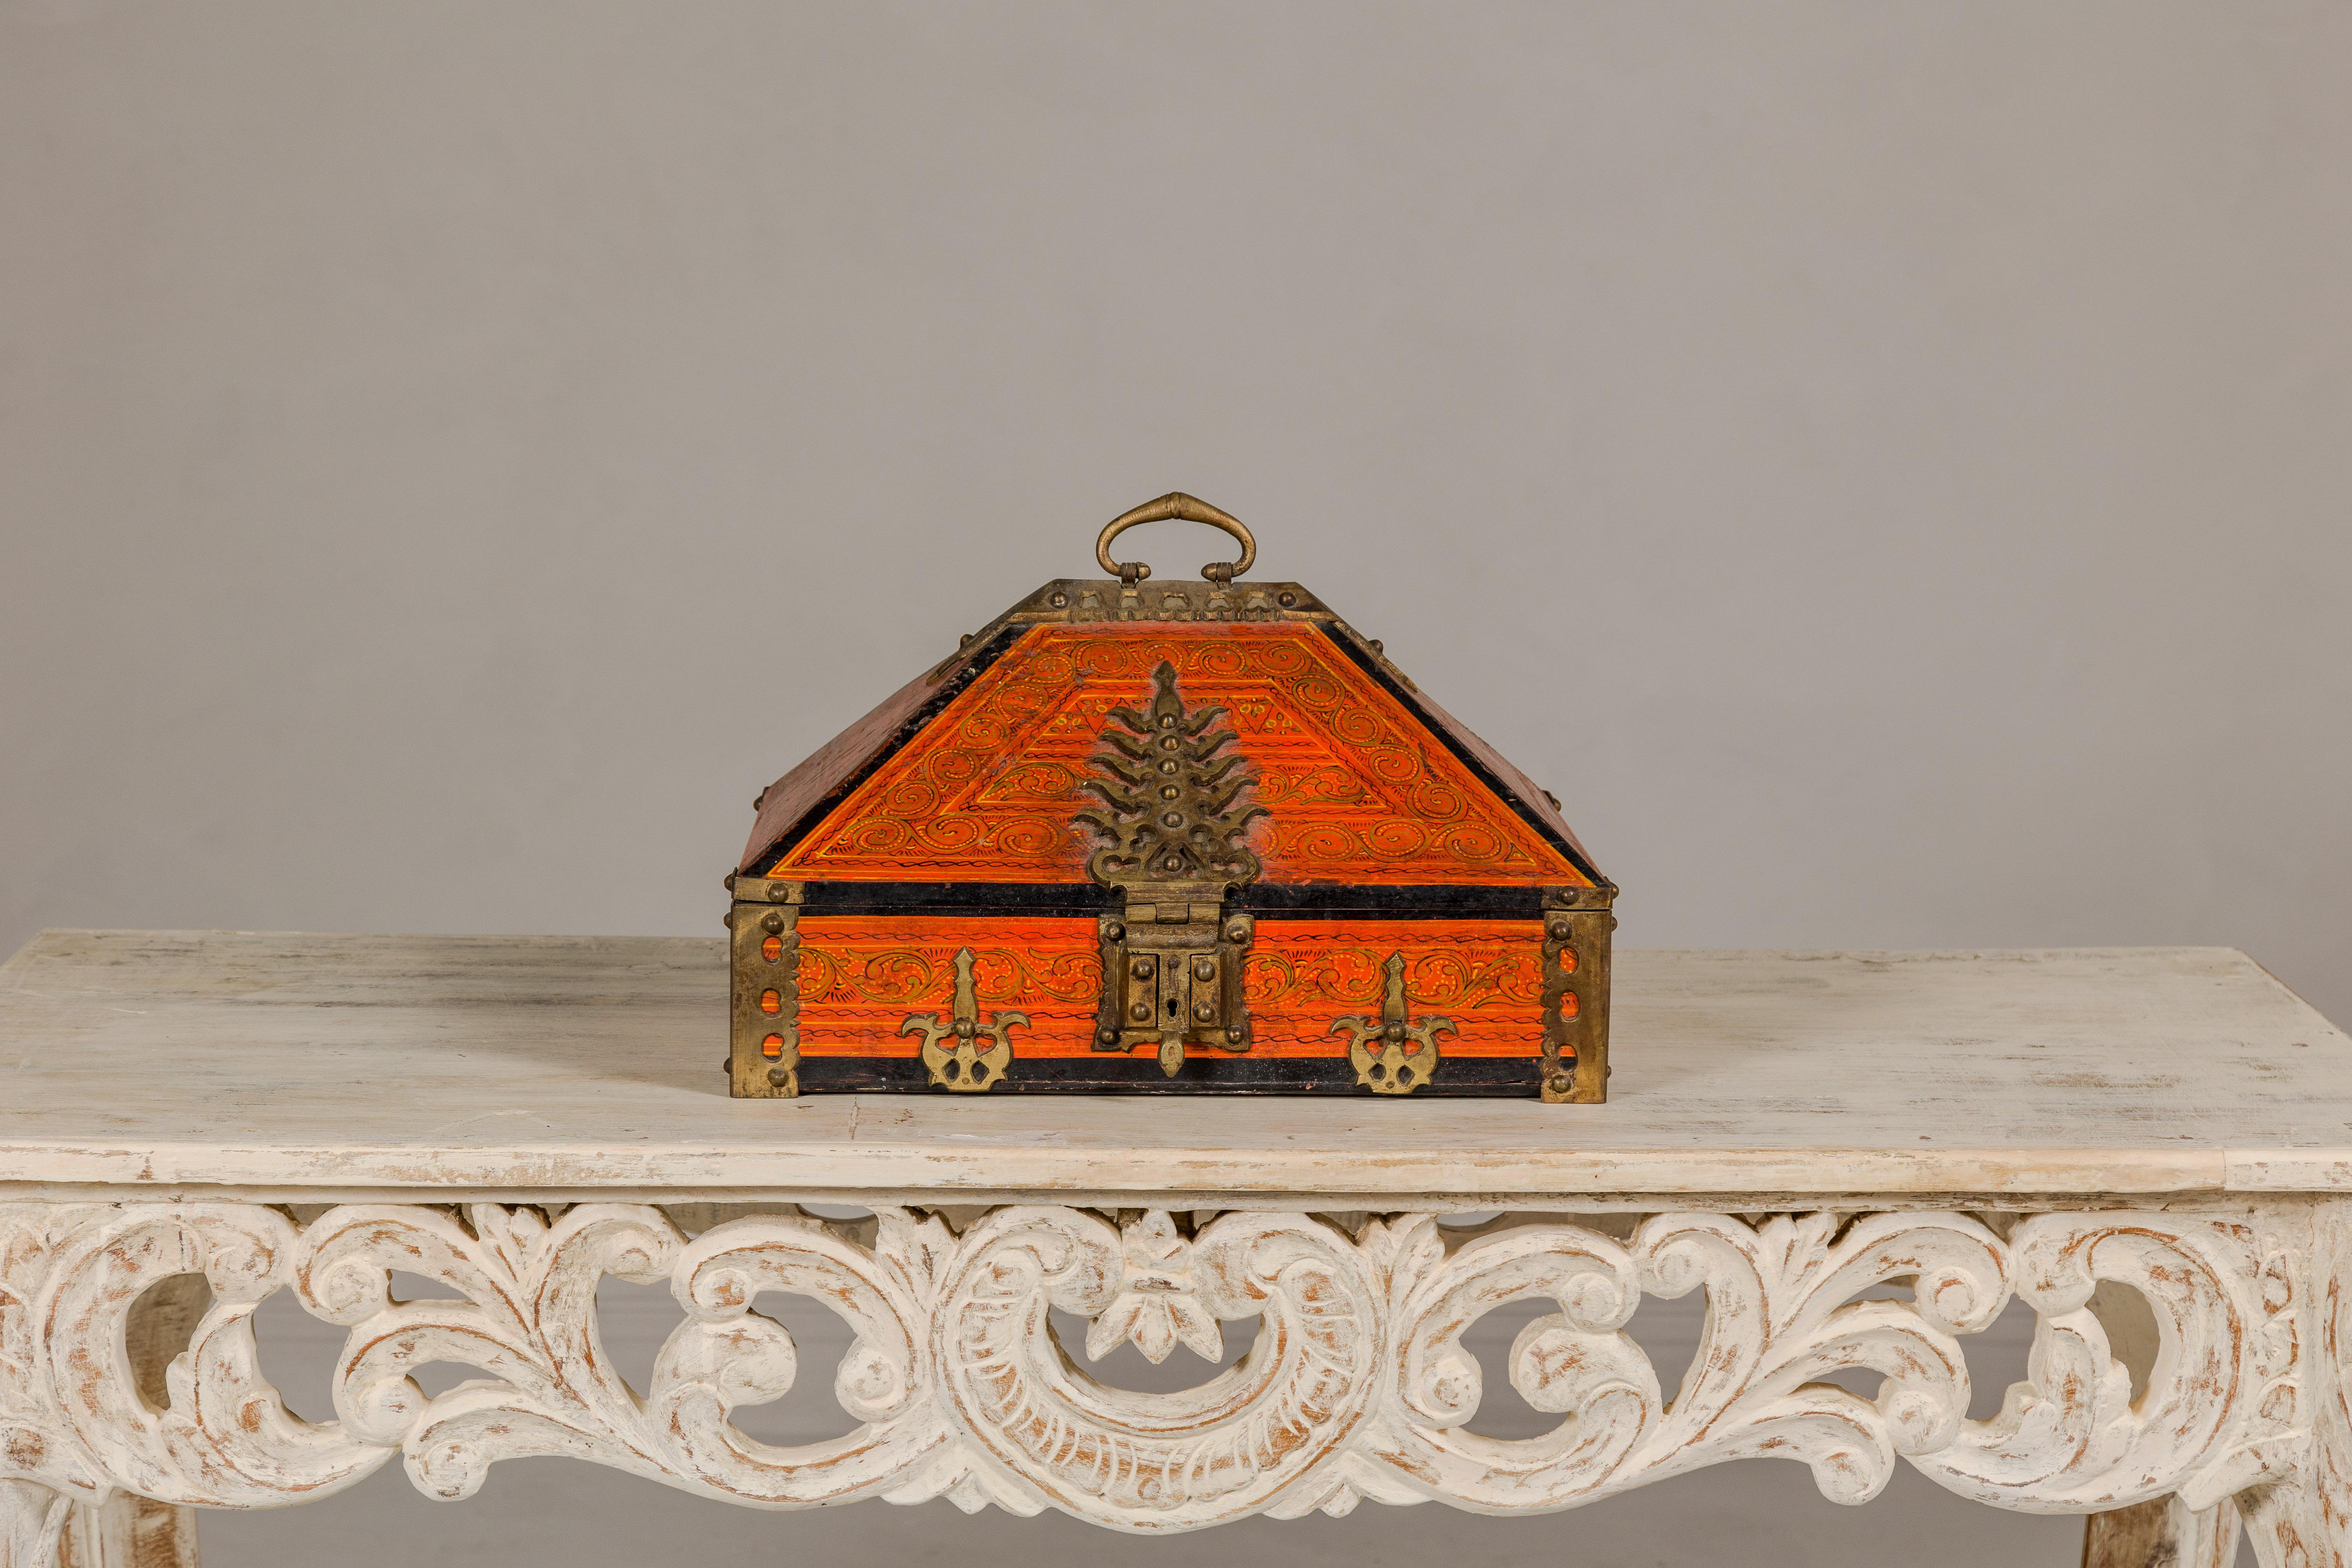 This South Indian jewelry box, known as a Malabar box, hailing from Kerala, is a magnificent piece of cultural artistry and historical significance. Its deep orange lacquer finish evokes the vibrant hues typical of the region, while the ornate brass